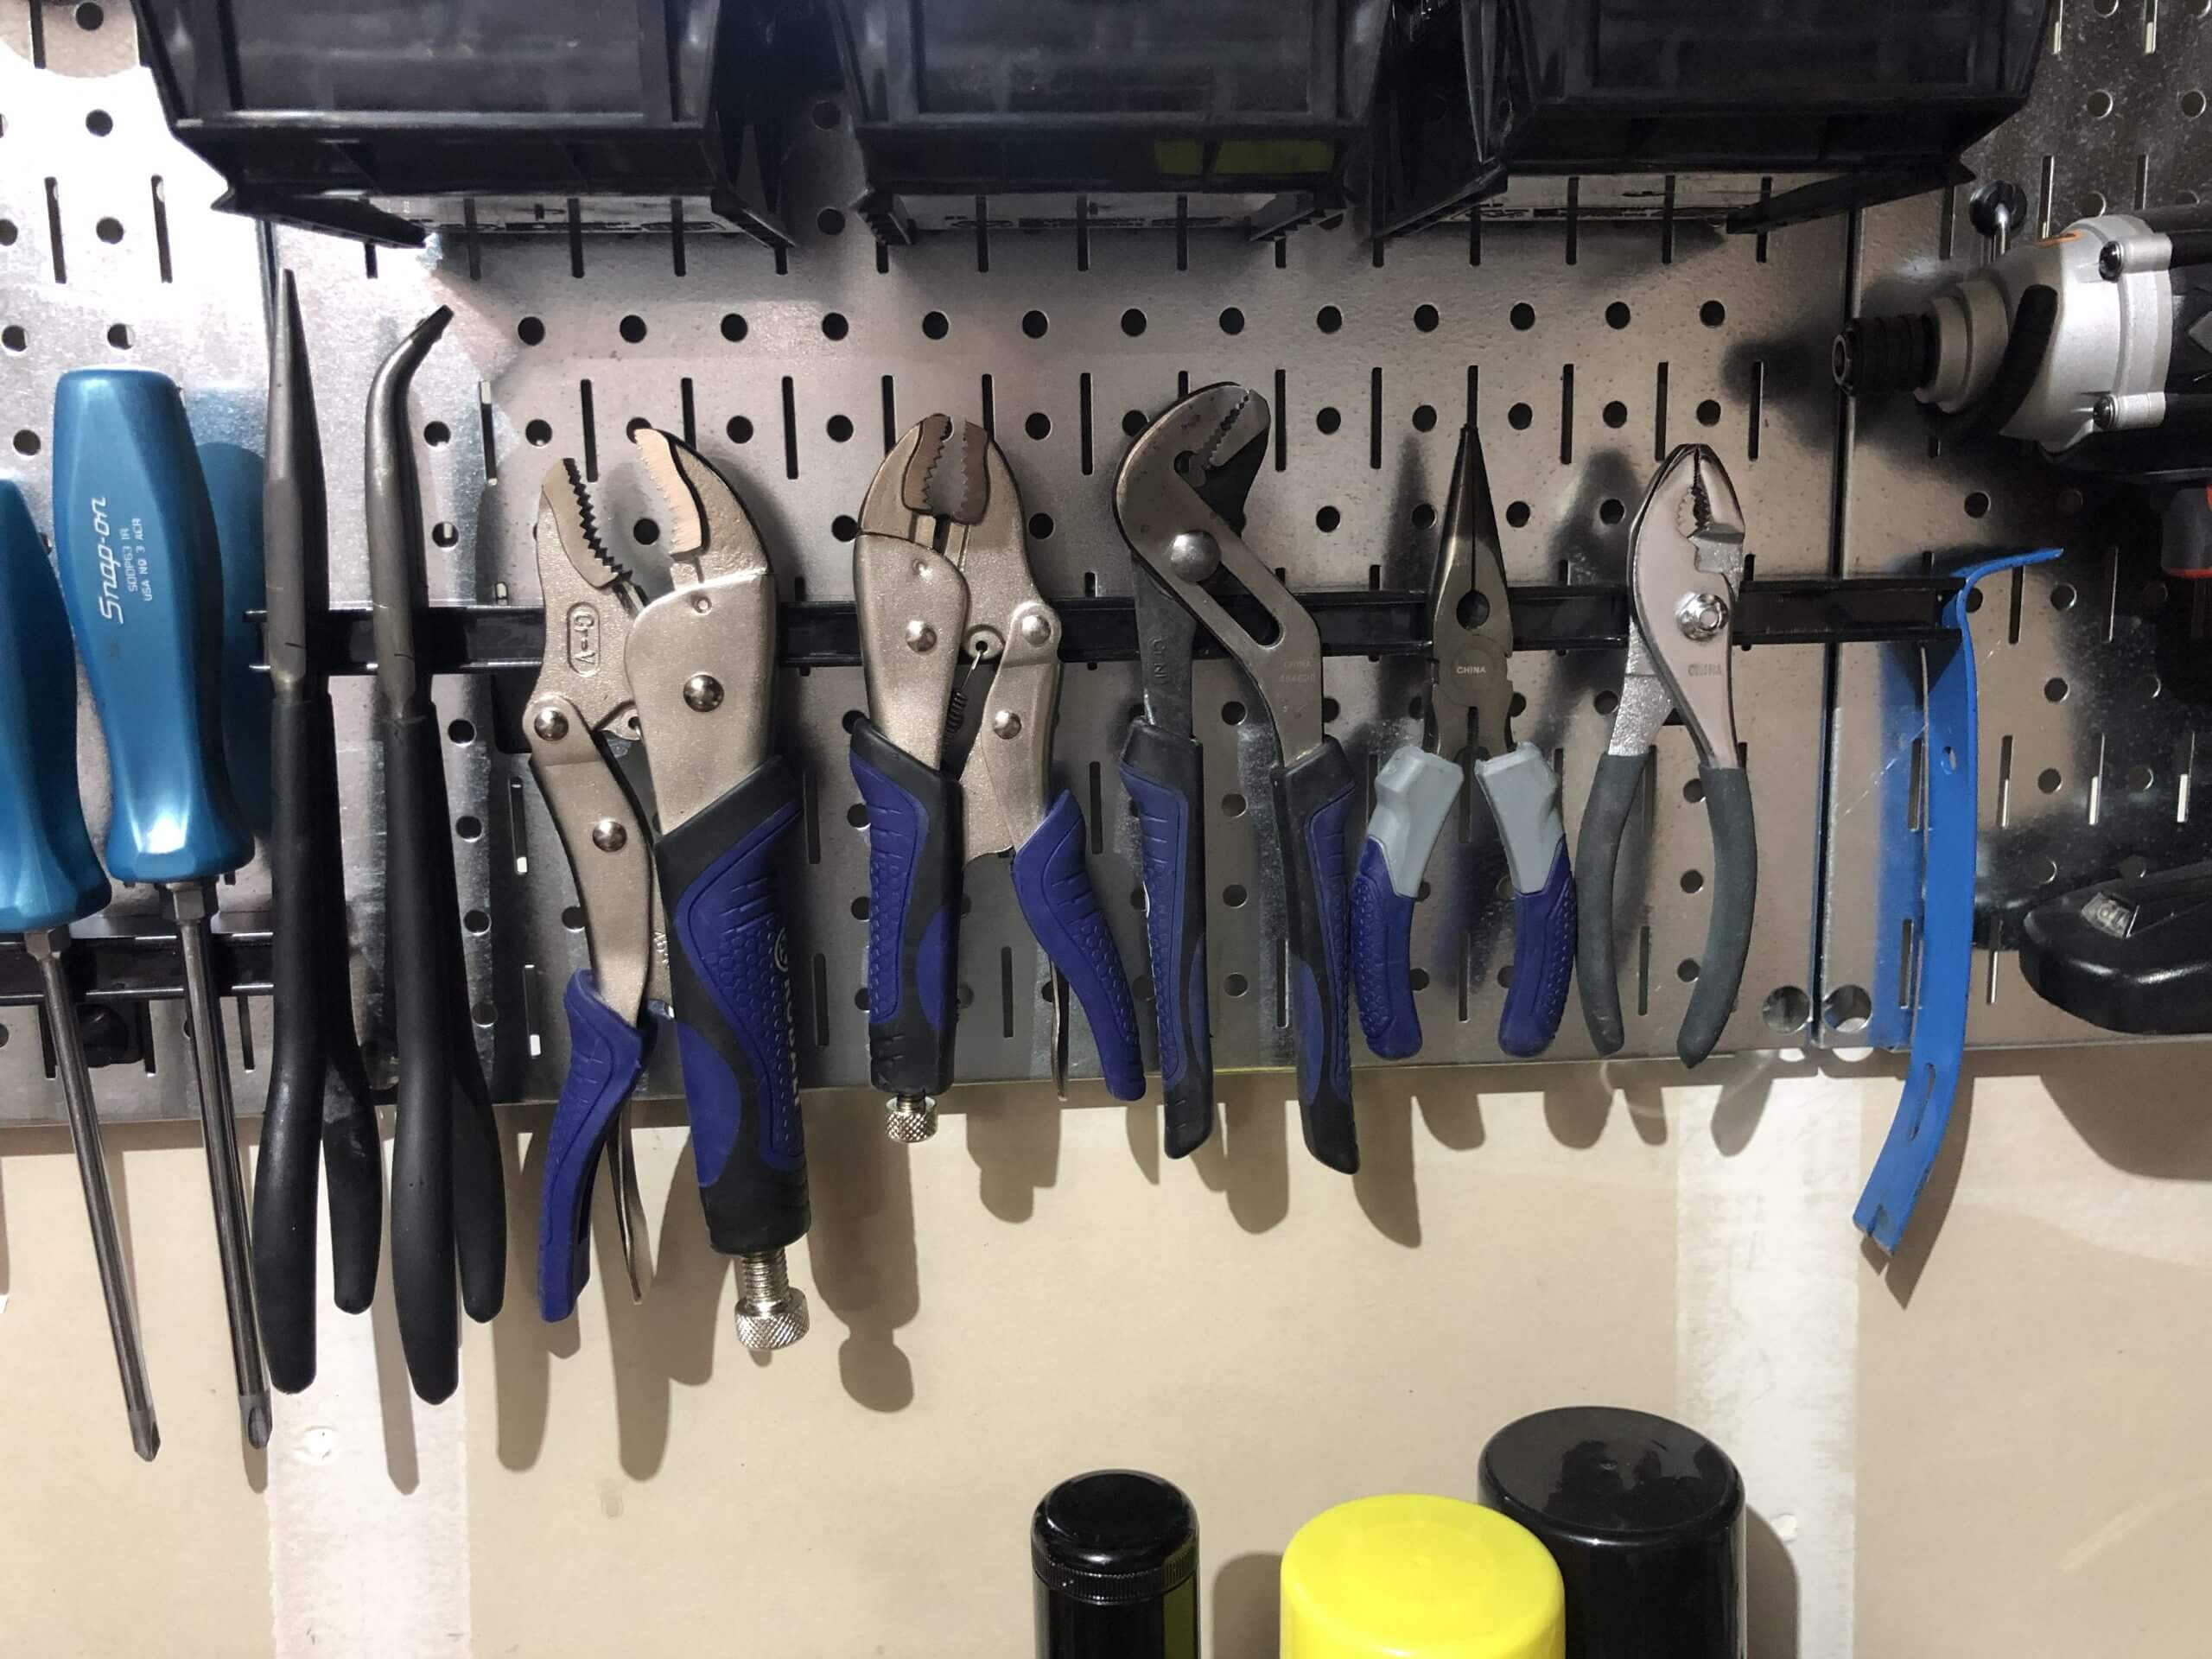 magnetic strips for holding small tools